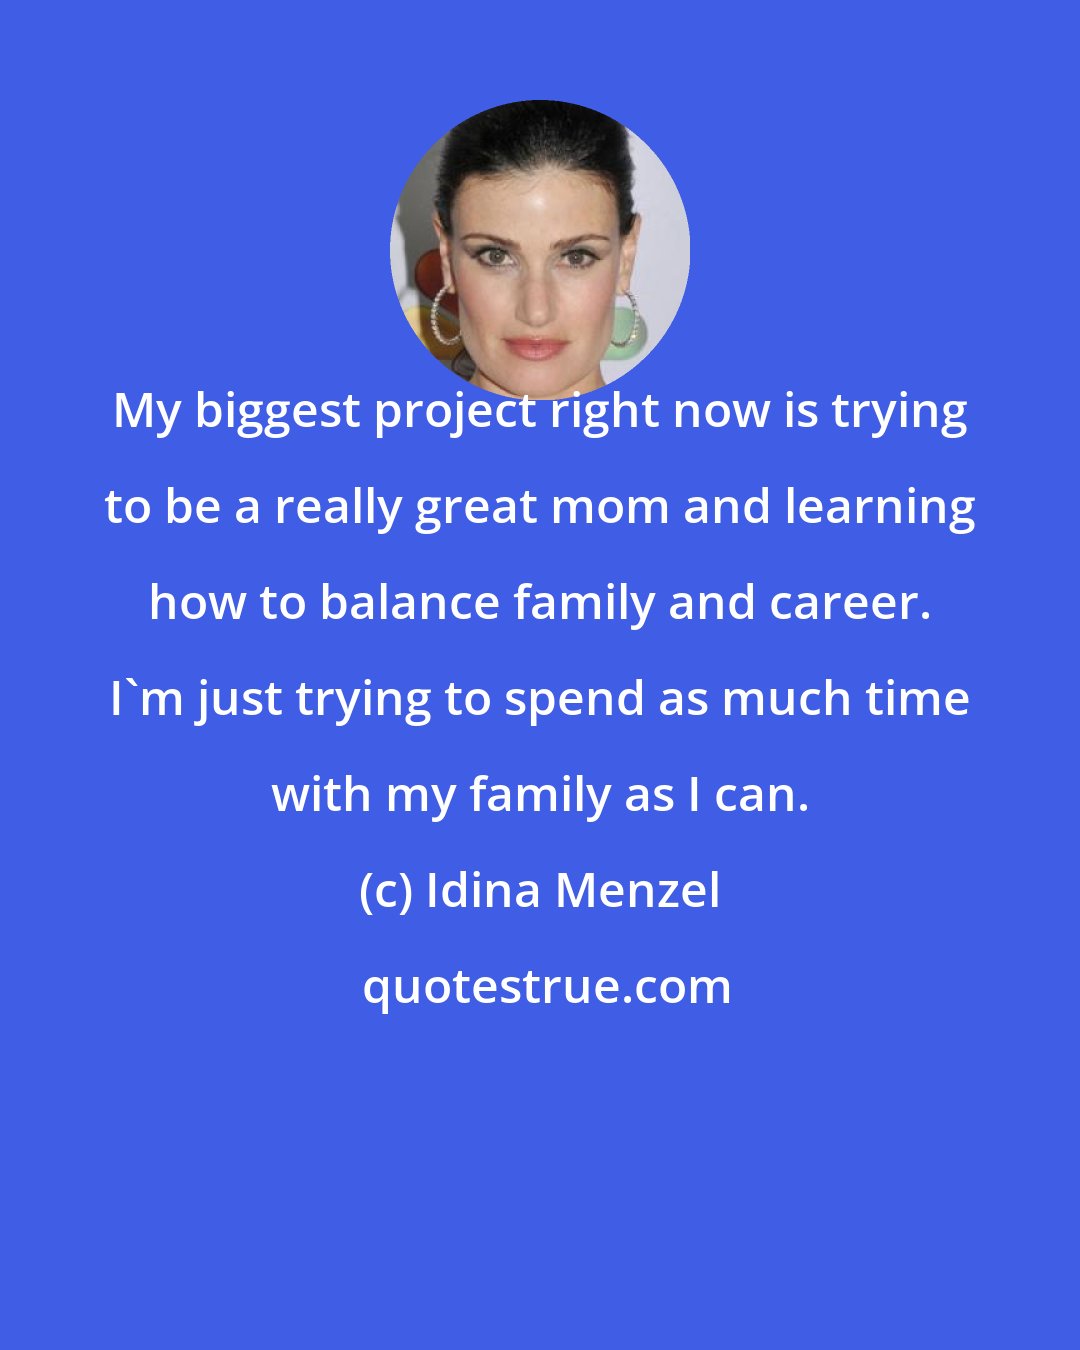 Idina Menzel: My biggest project right now is trying to be a really great mom and learning how to balance family and career. I'm just trying to spend as much time with my family as I can.